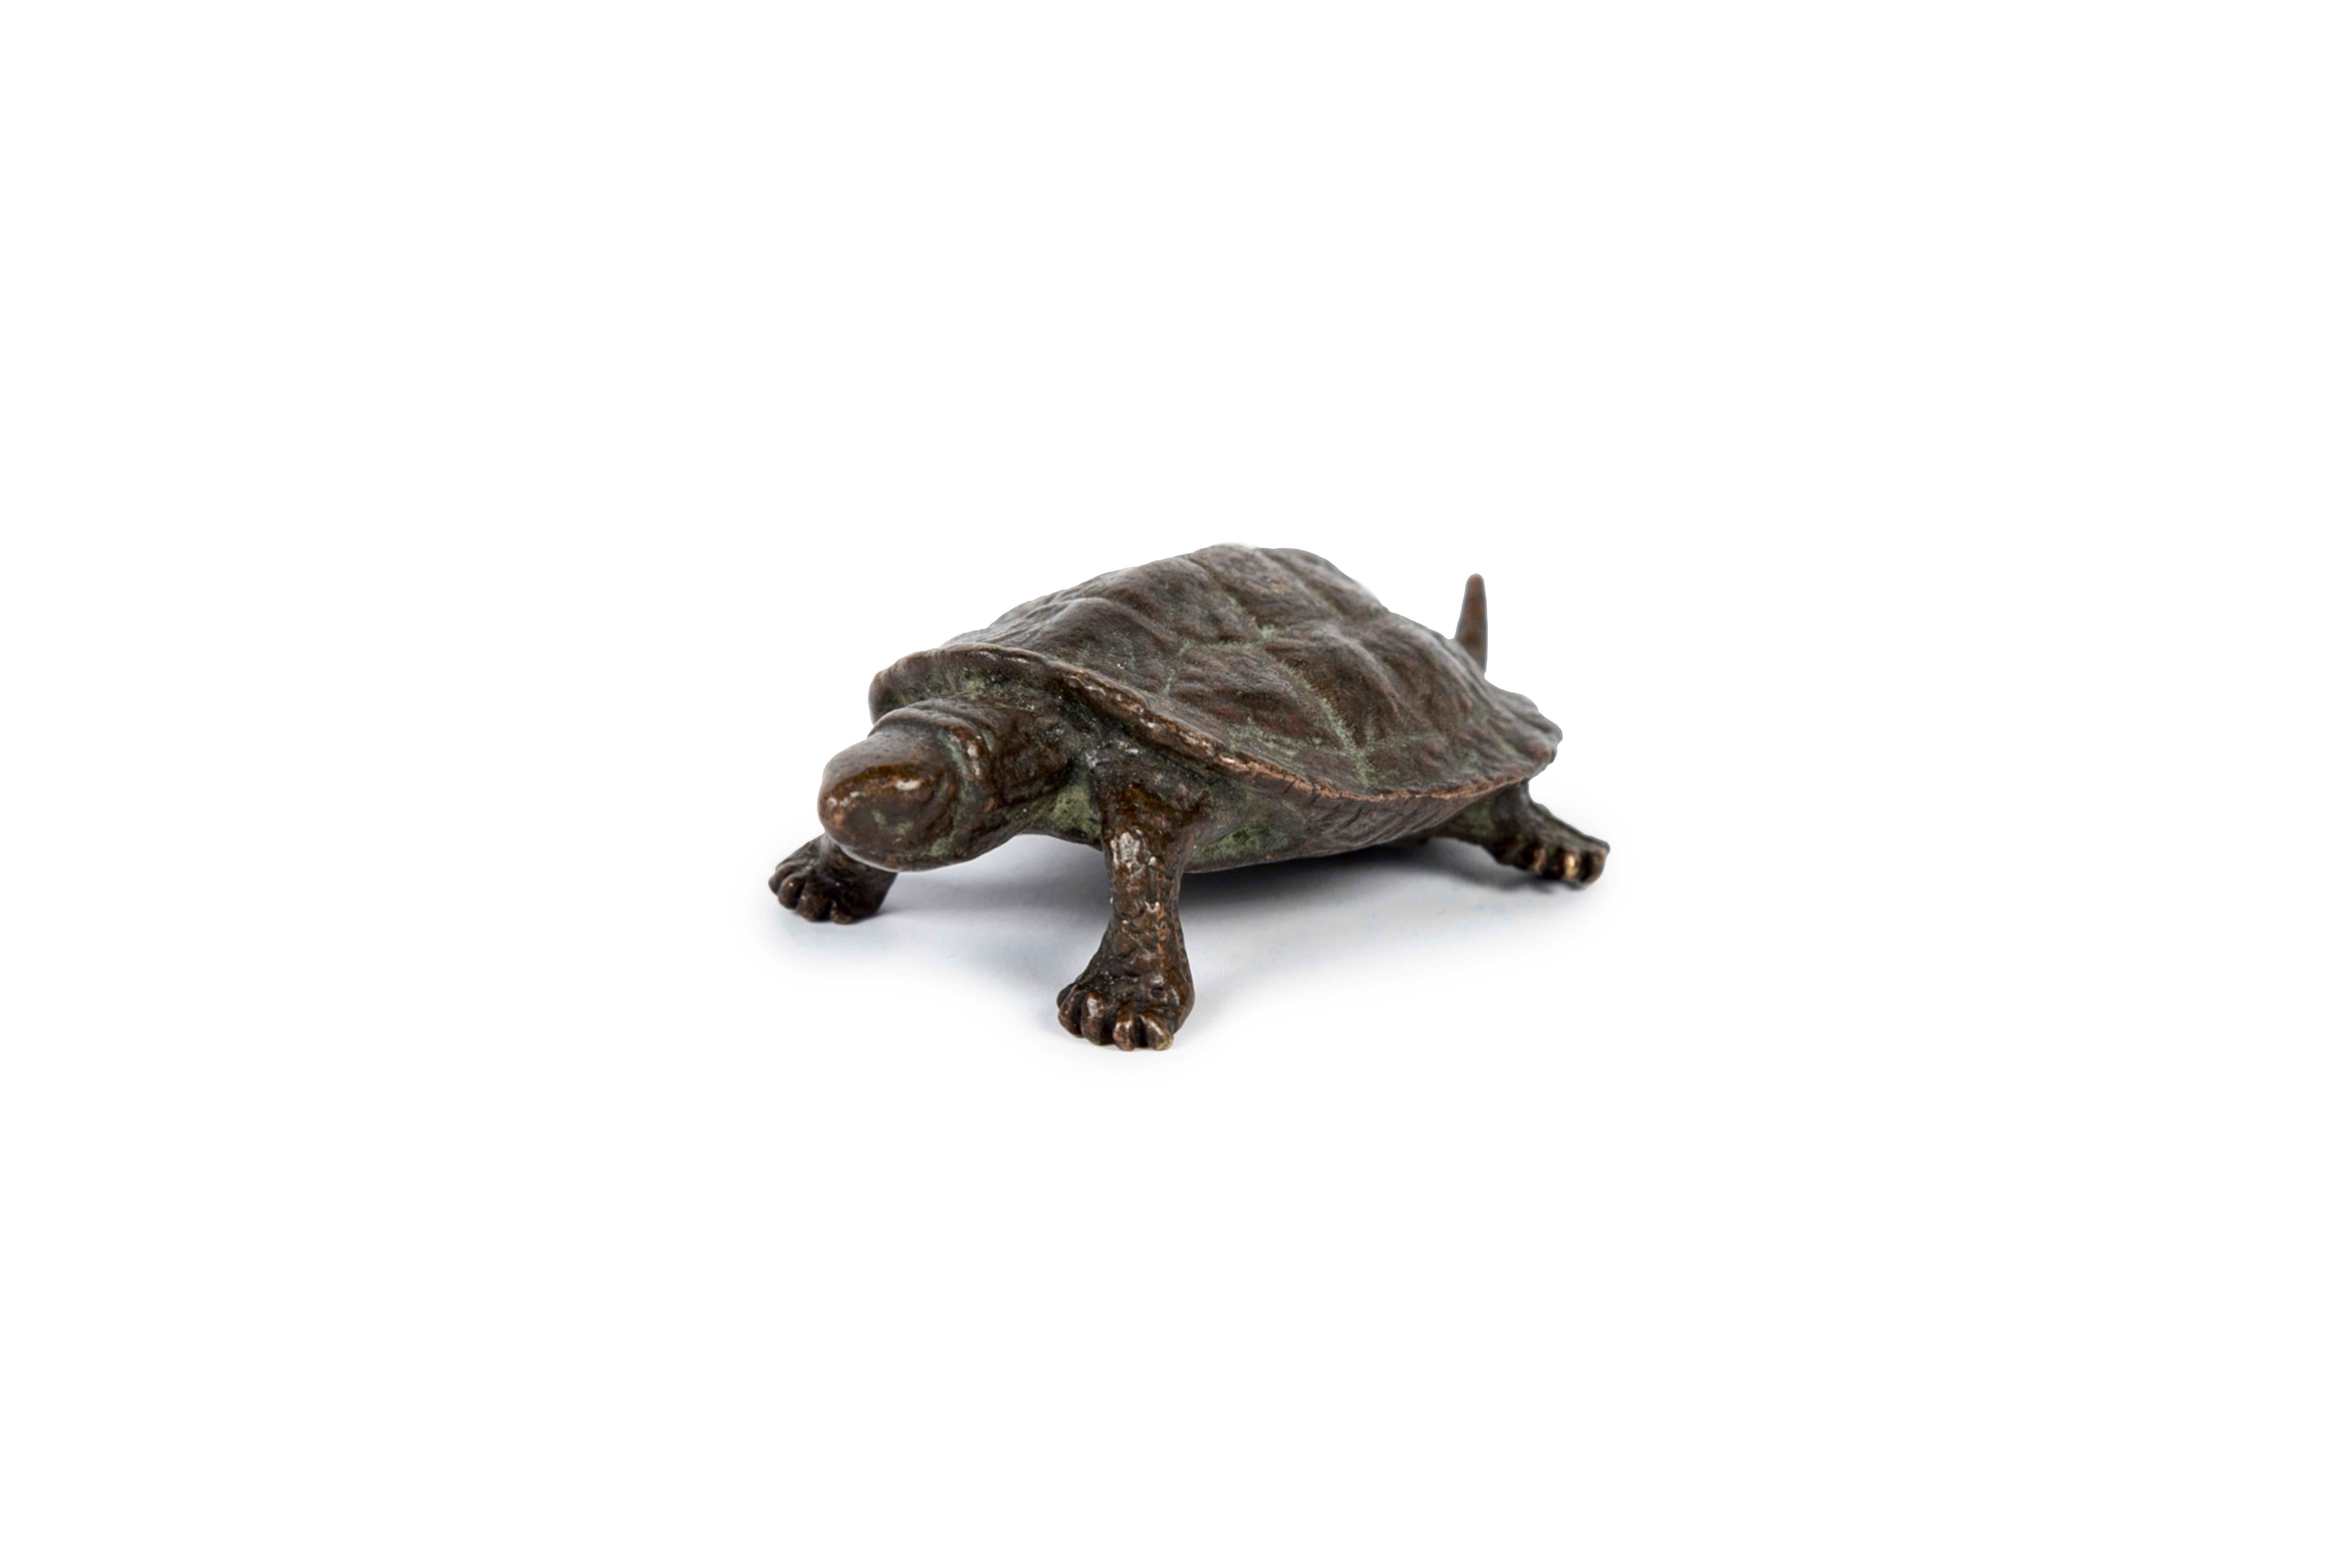 Okimono sculpture of a bronze turtle, tail retractable.
In Japan, the turtle (kame) is a symbol of longevity and an auspicious animal.
It is believed to bring ten thousand years of happiness.
Signed Hata (はた) on the underside